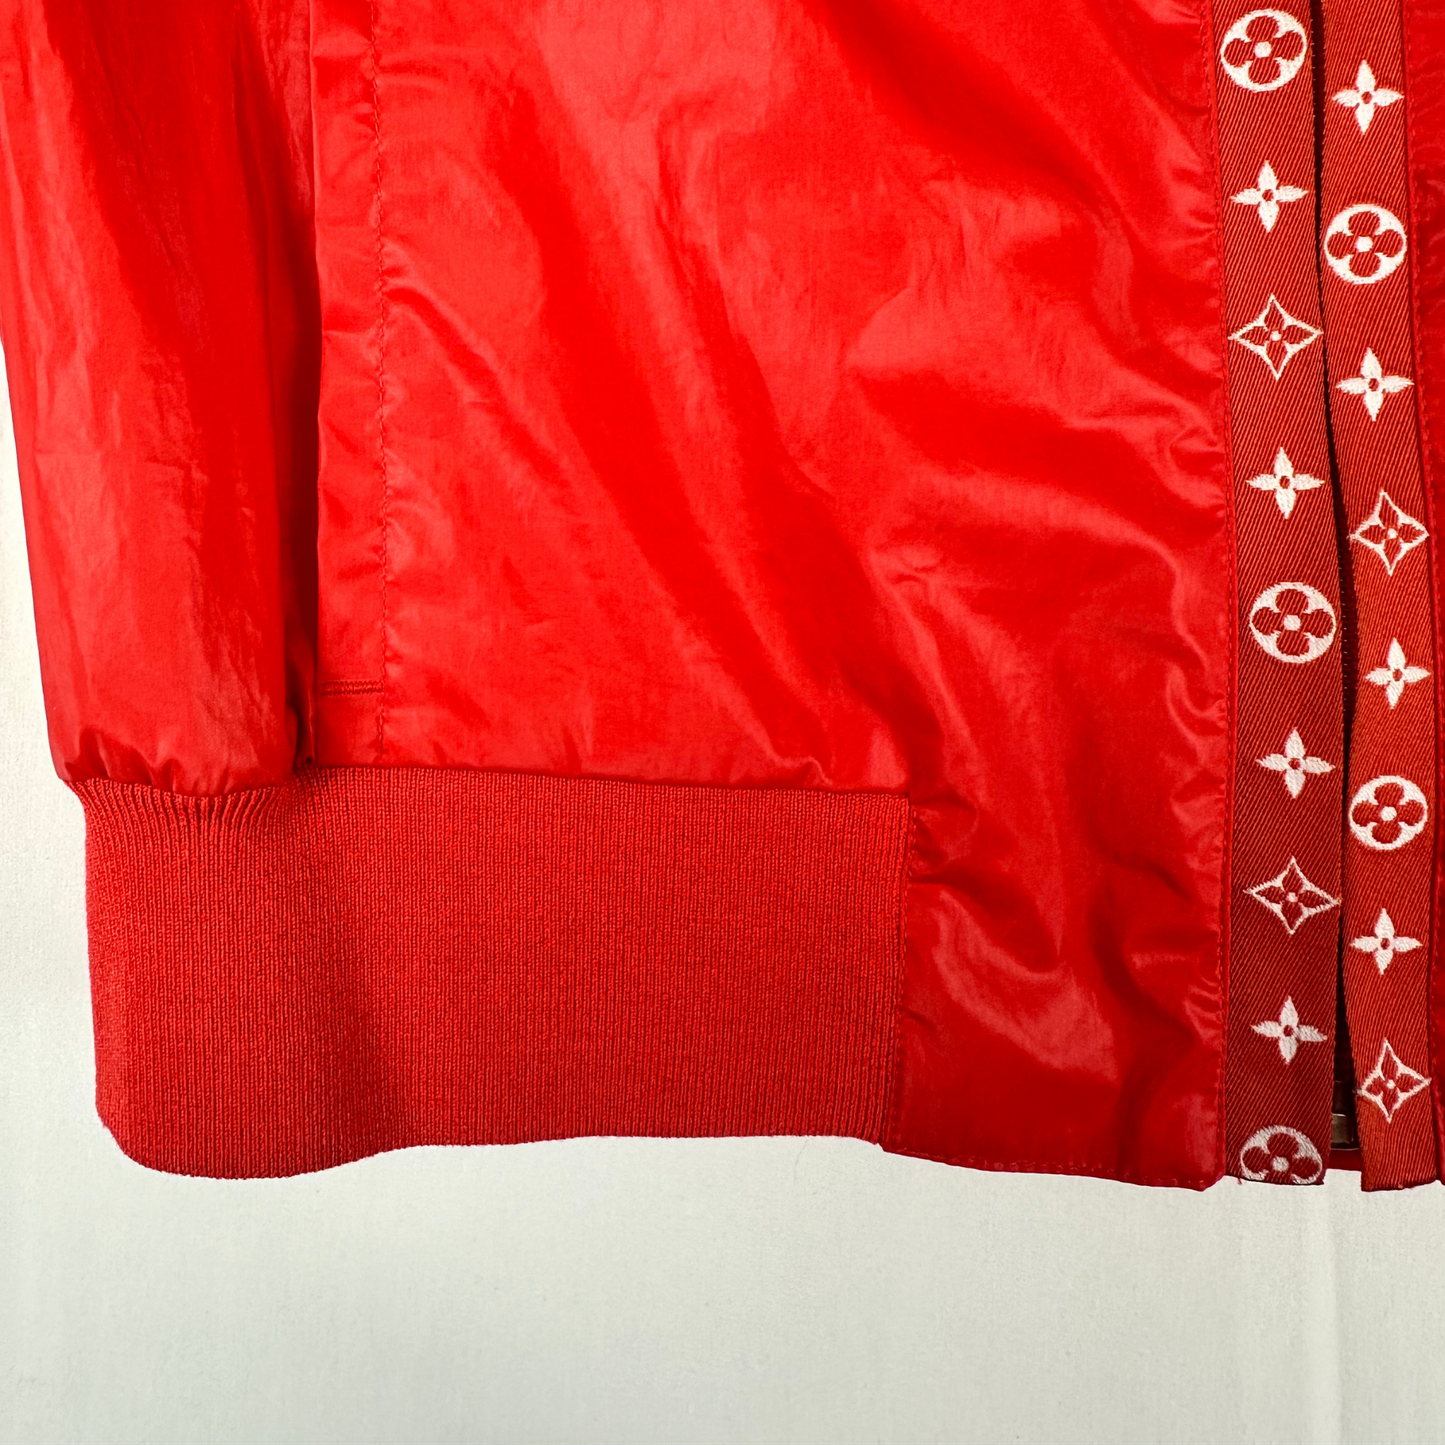 LOUIS VUITTON Red Poly Short-Sleeve Zip Up